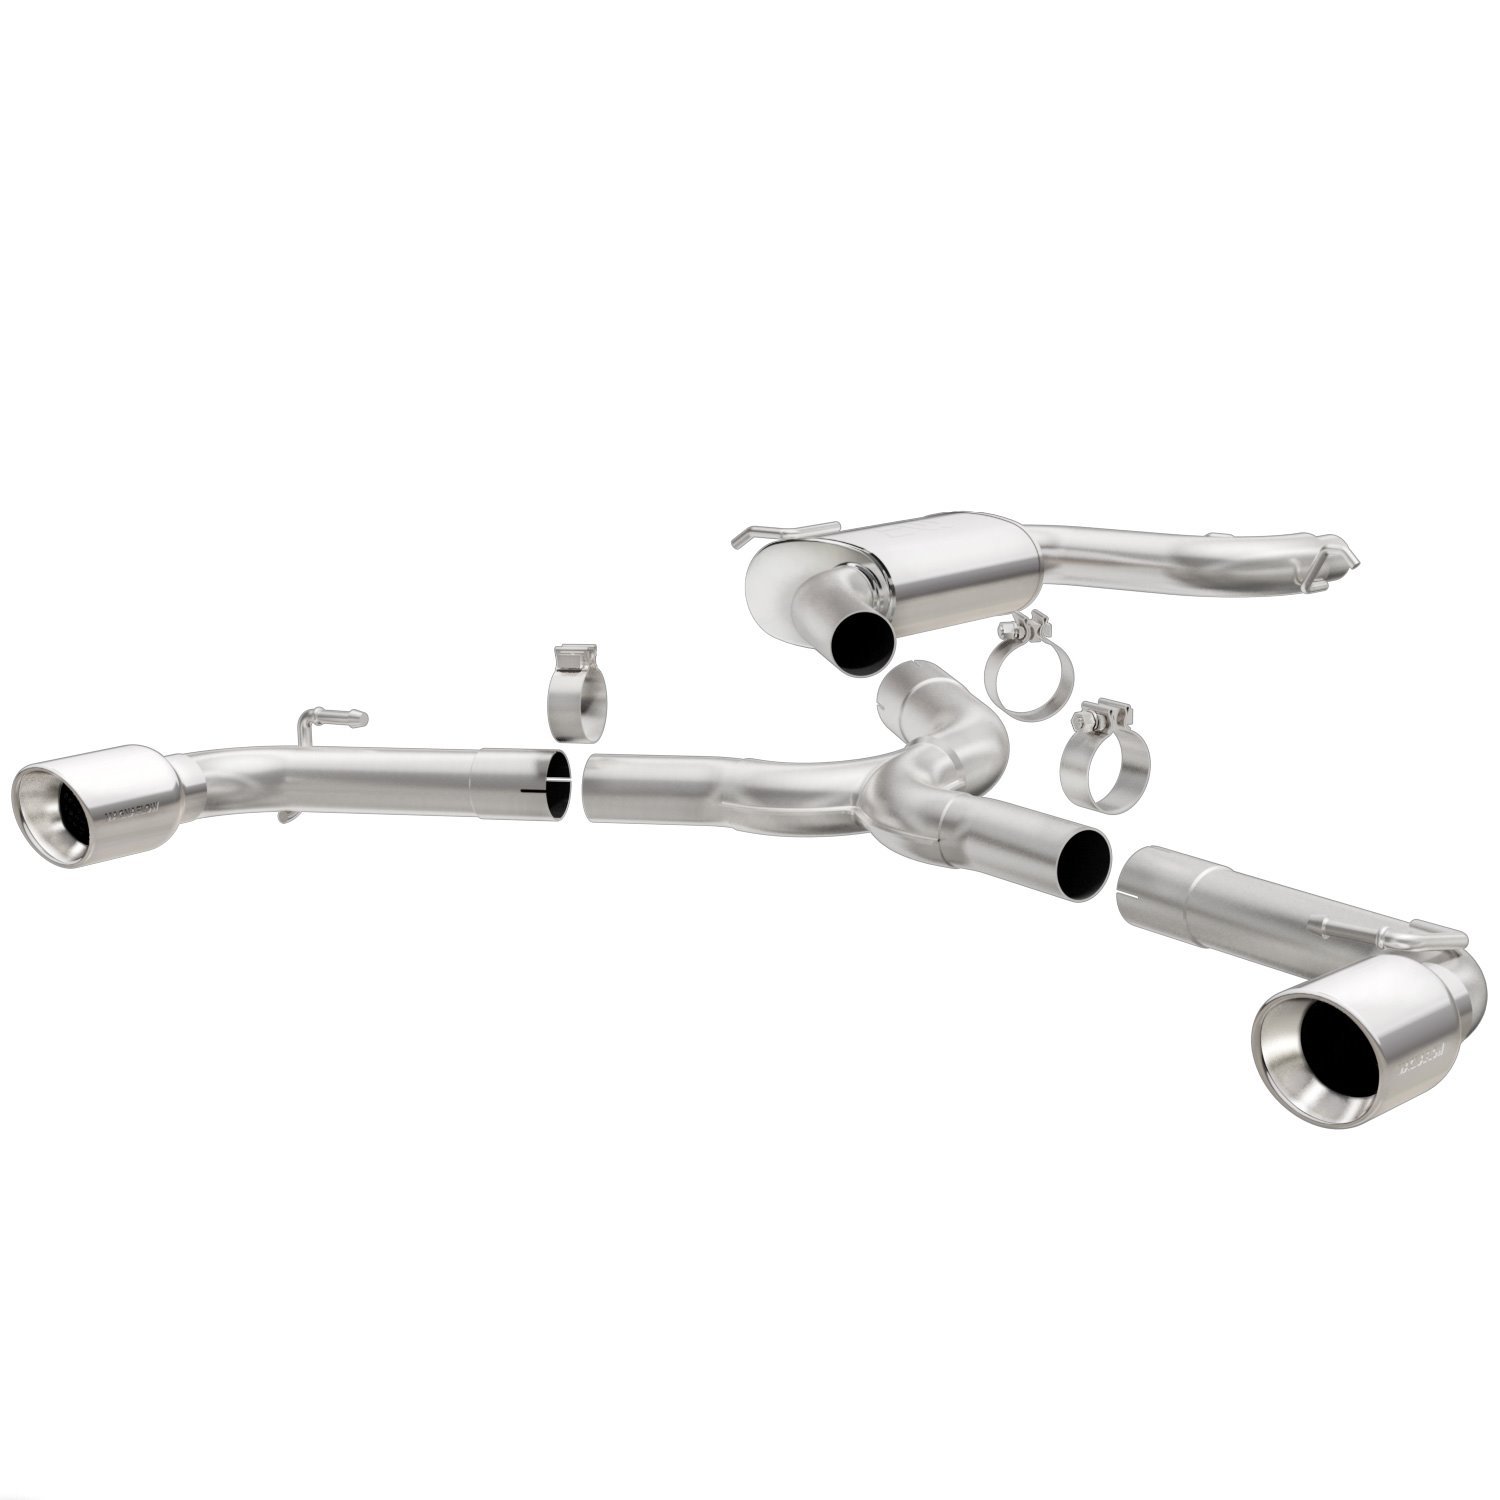 Touring Series Cat-Back Exhaust System 2010-14 VW GTI 2.0L L4